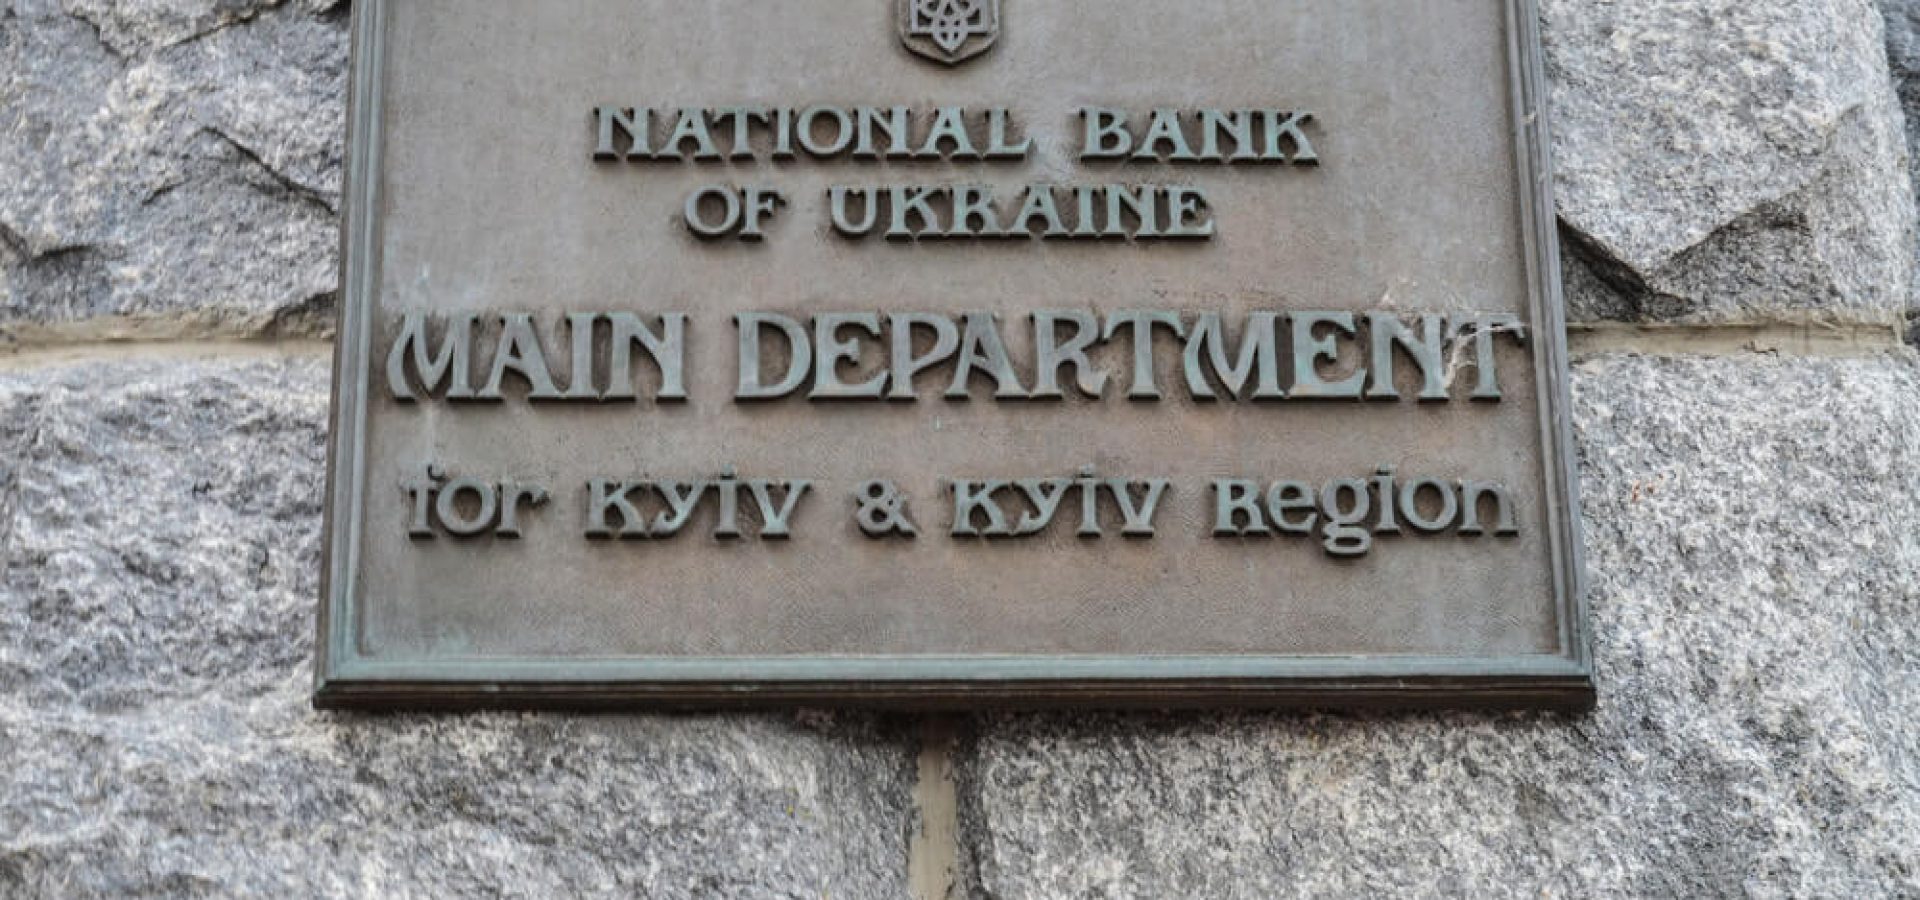 Wibest Broker — Ukraine President: Closeup of the National Bank Main Department Building with sign.